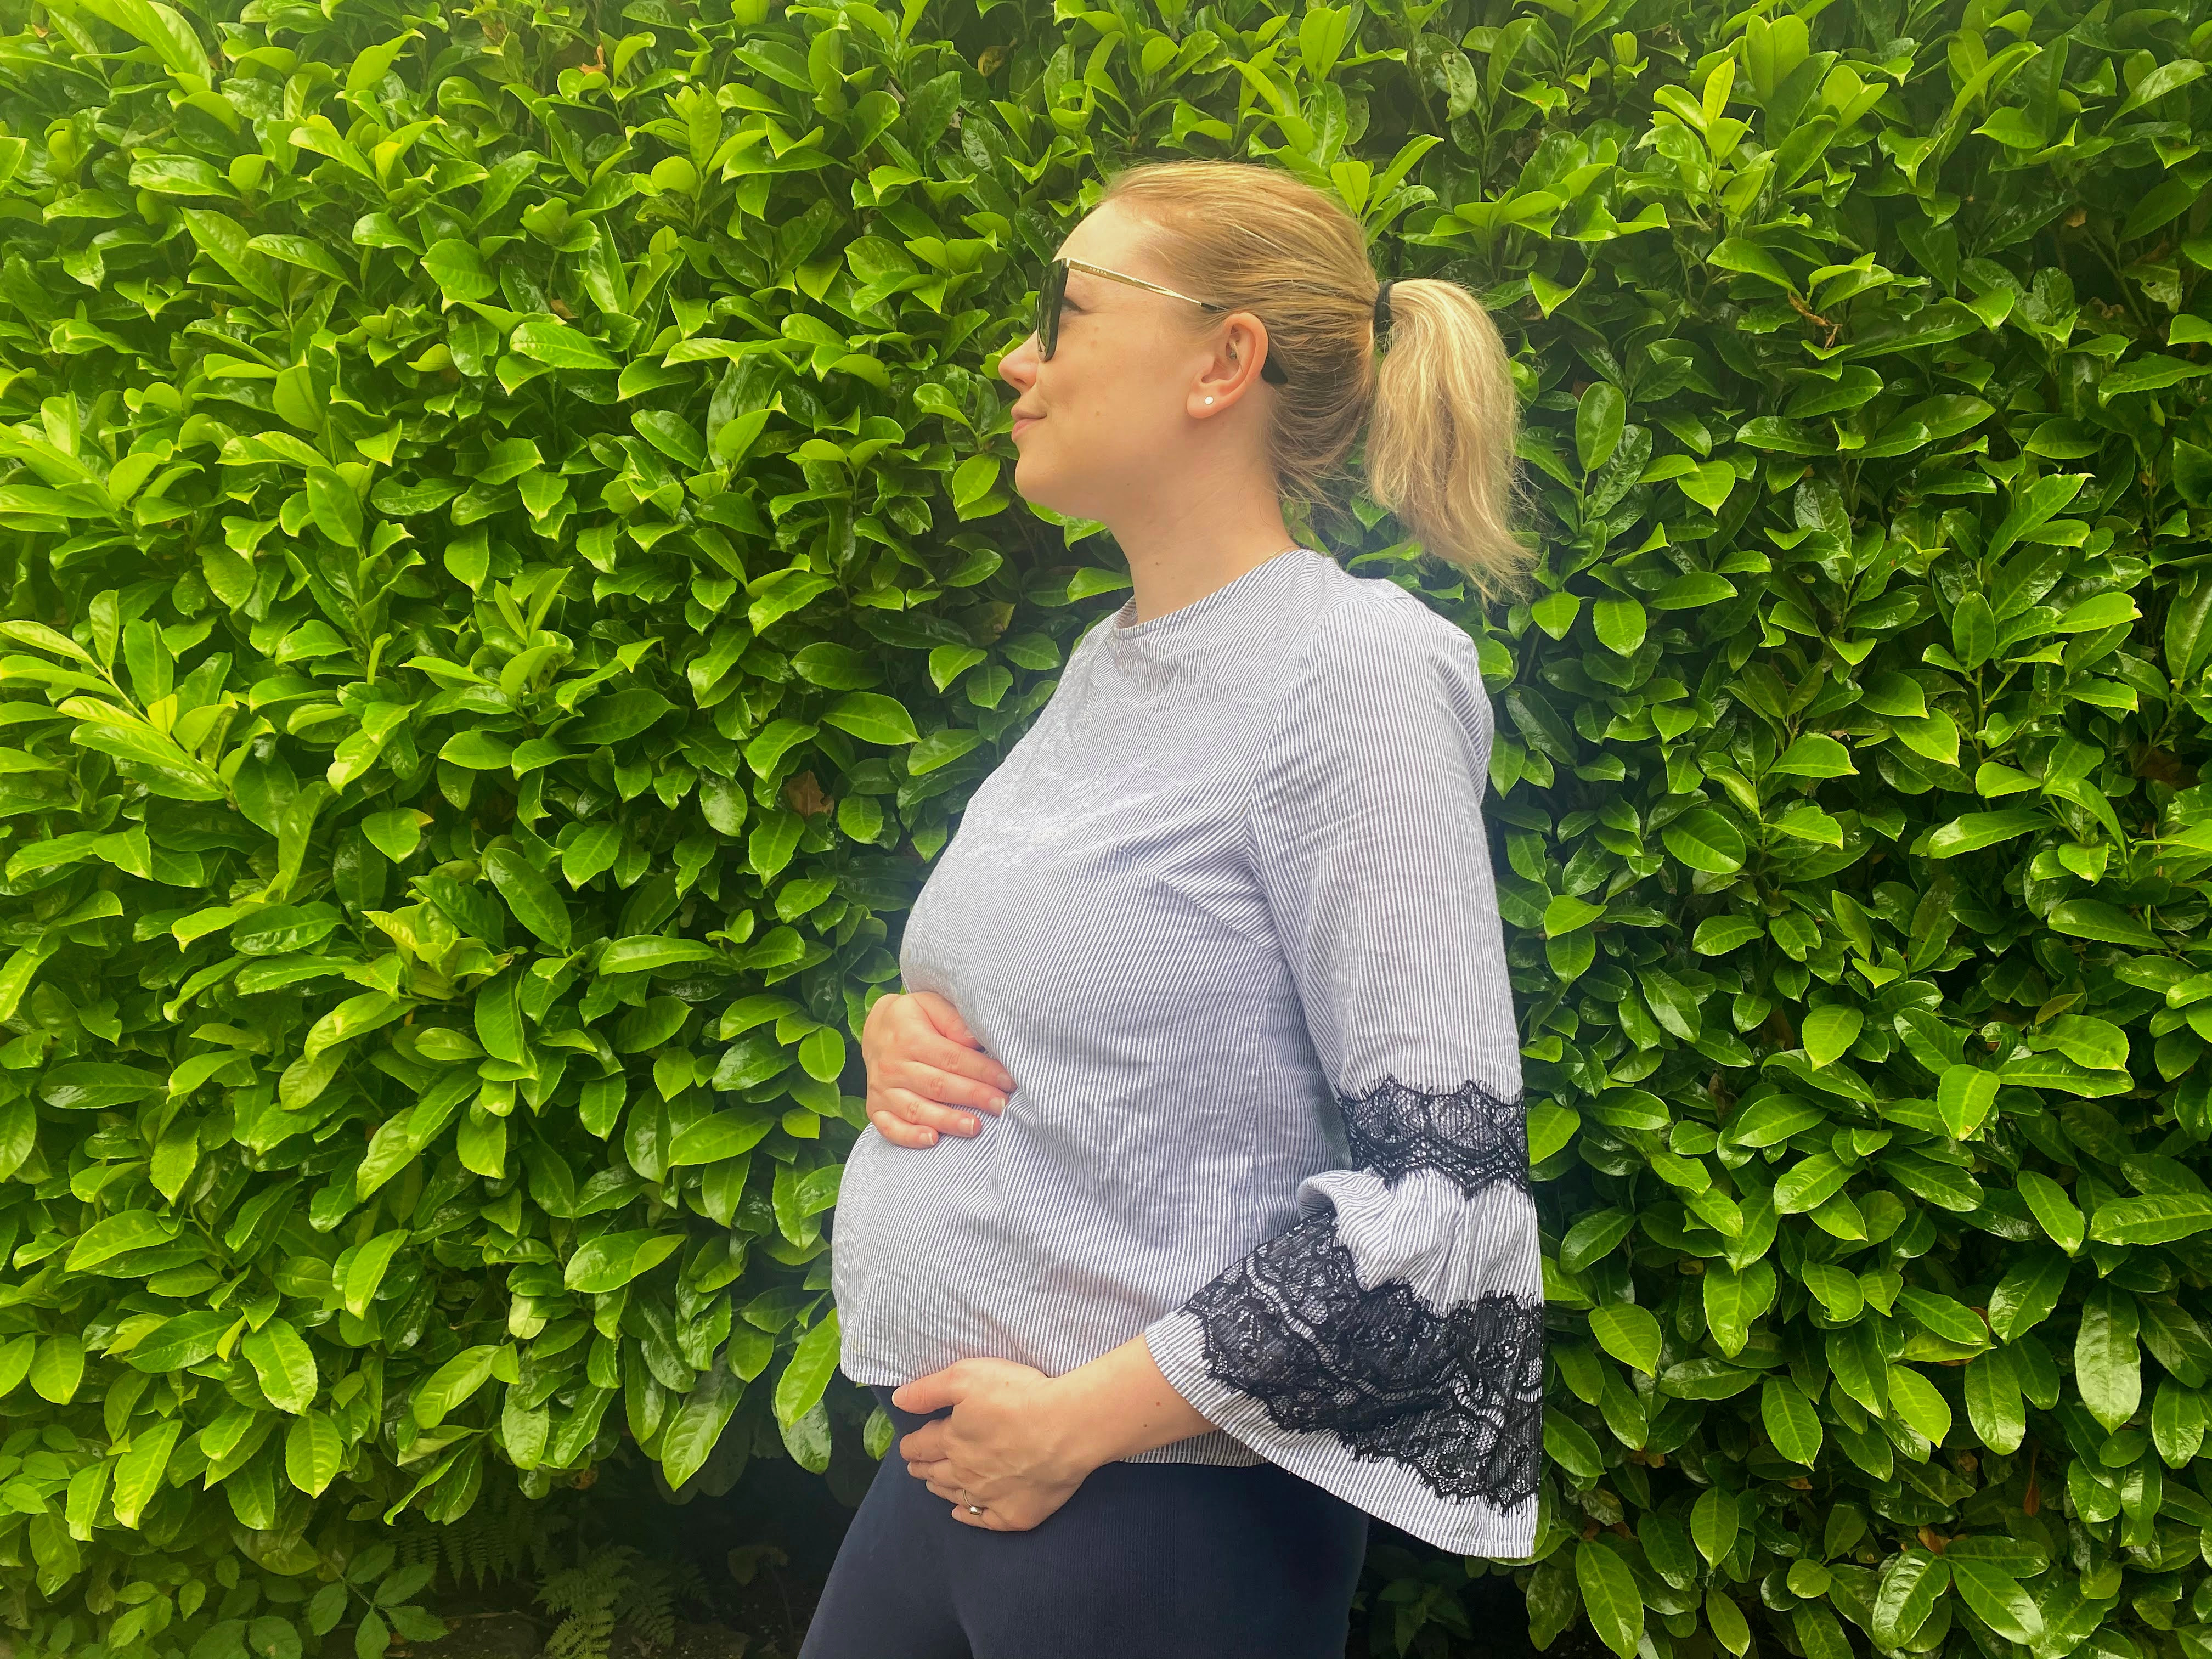 Why I got the Covid vaccine during pregnancy